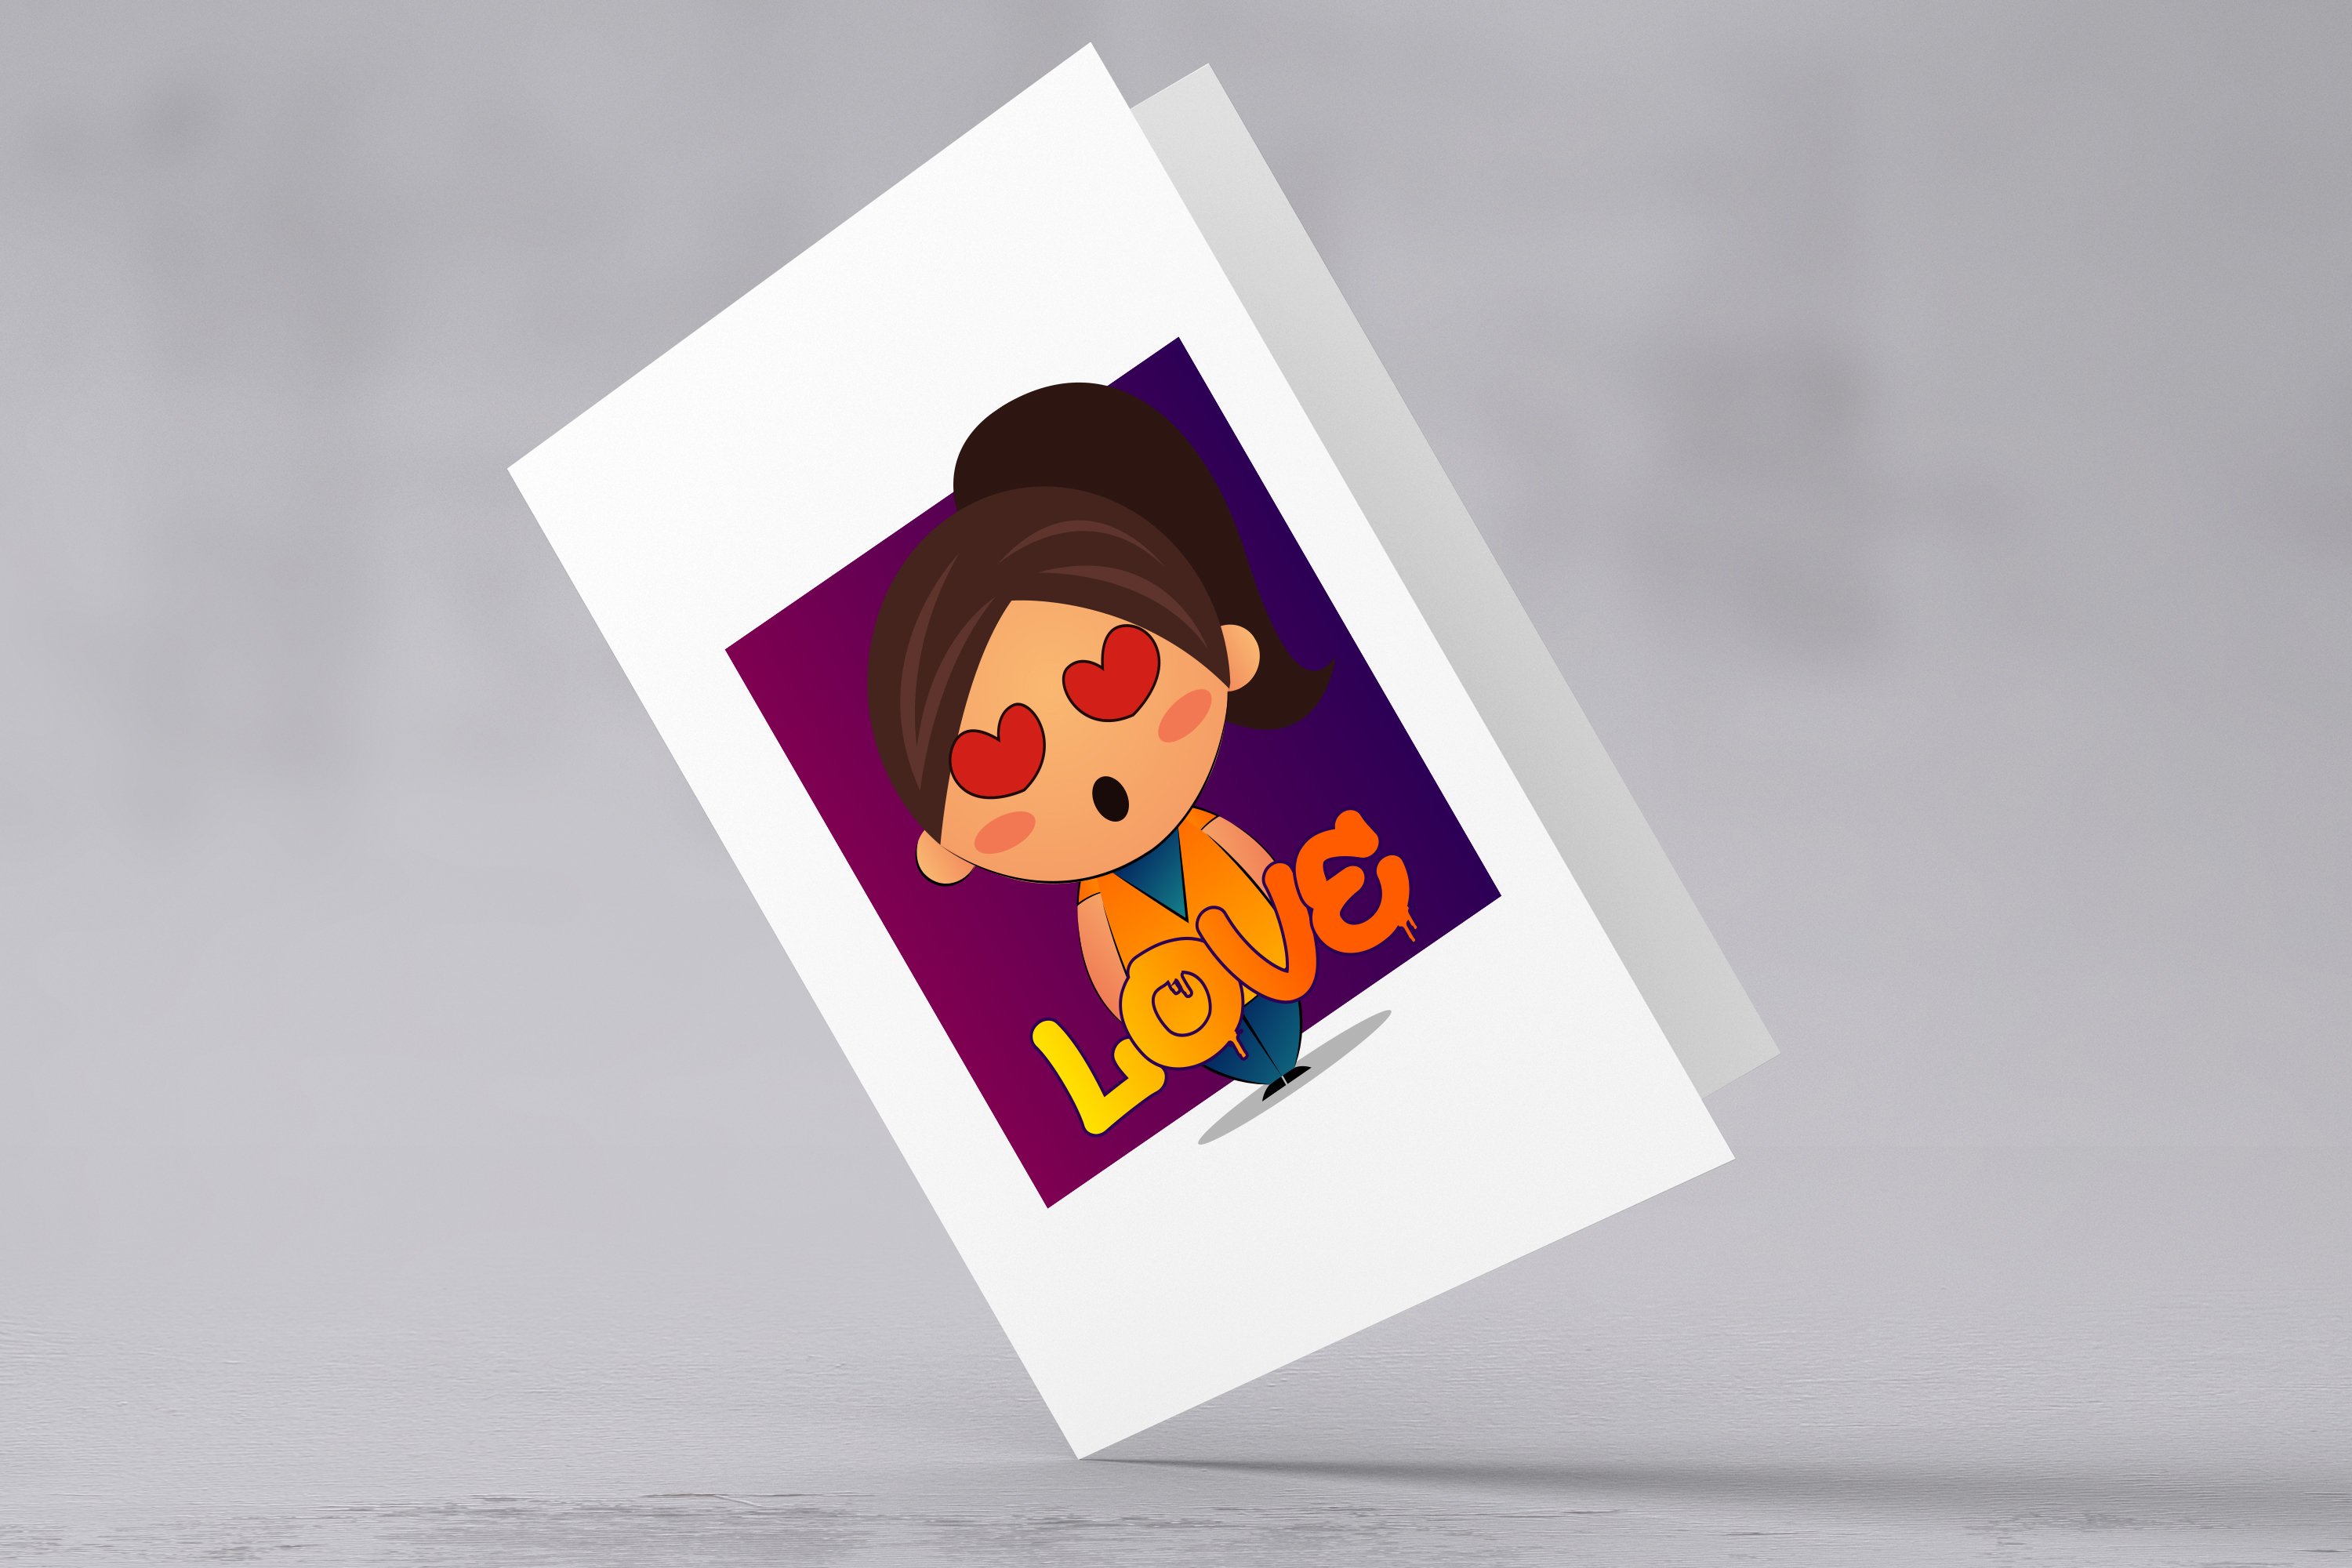 Image postcard with a cheerful emoticon girl.